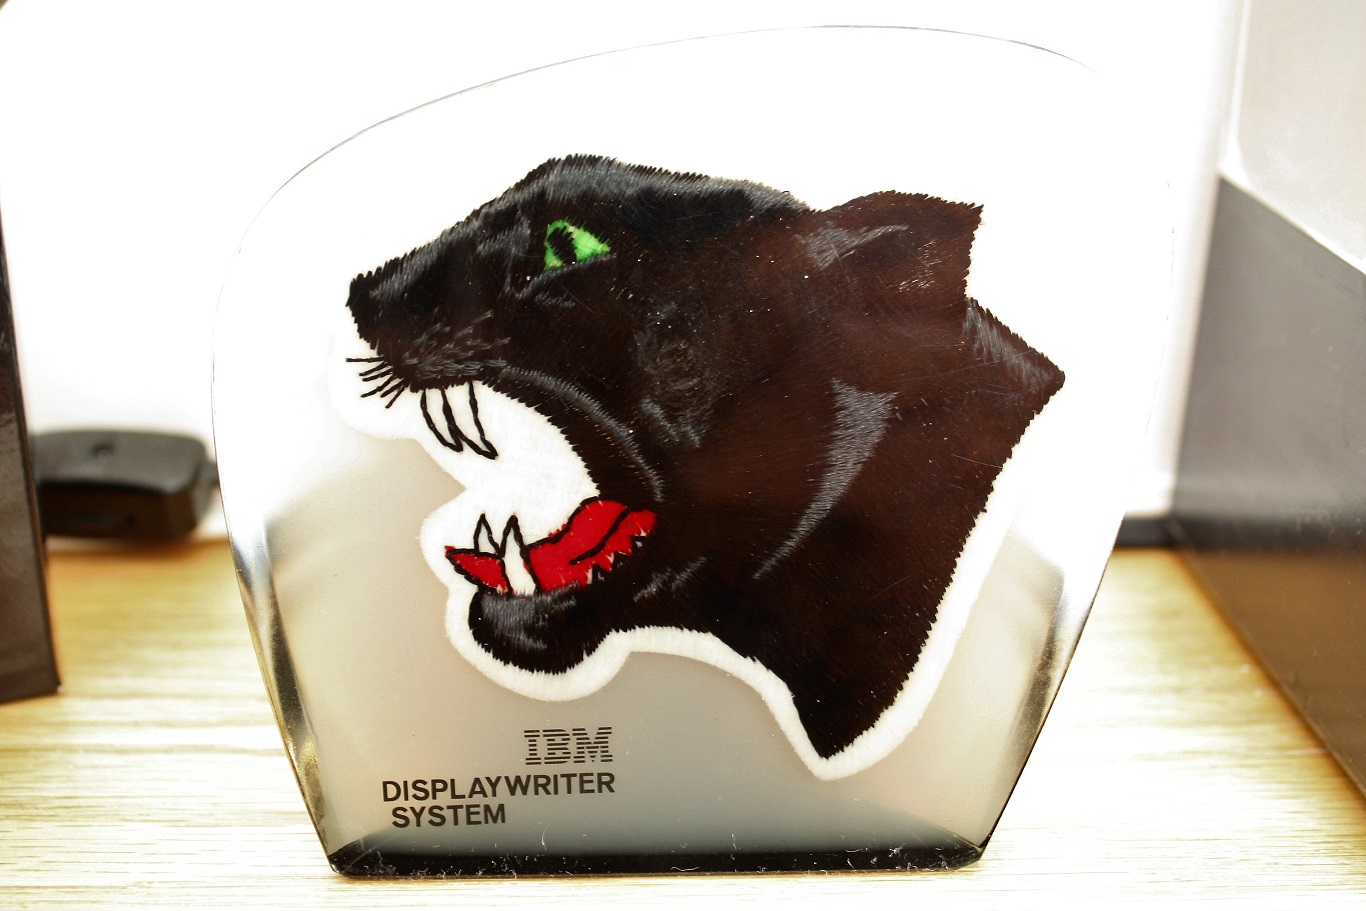 IBM Displaywriter project code-named &quot;panther&quot; lucite momento